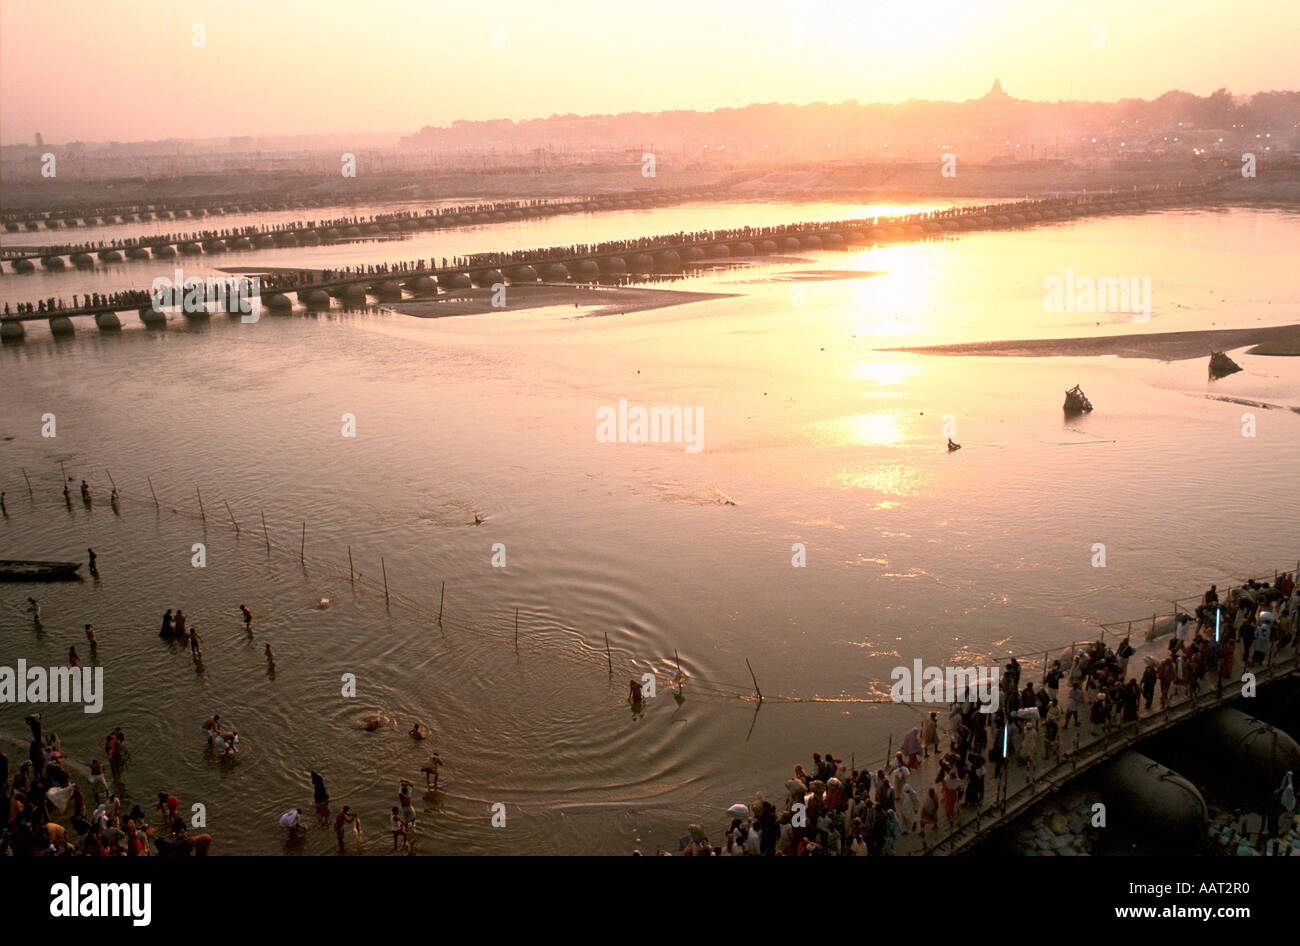 KUMBH MELA INDIA 2001 AS THE SUN SETS OVER ALLAHABAD MANY PILGRIMS BATHE AND PRAY IN THE WATERS OF THE GANGES 2001 Stock Photo